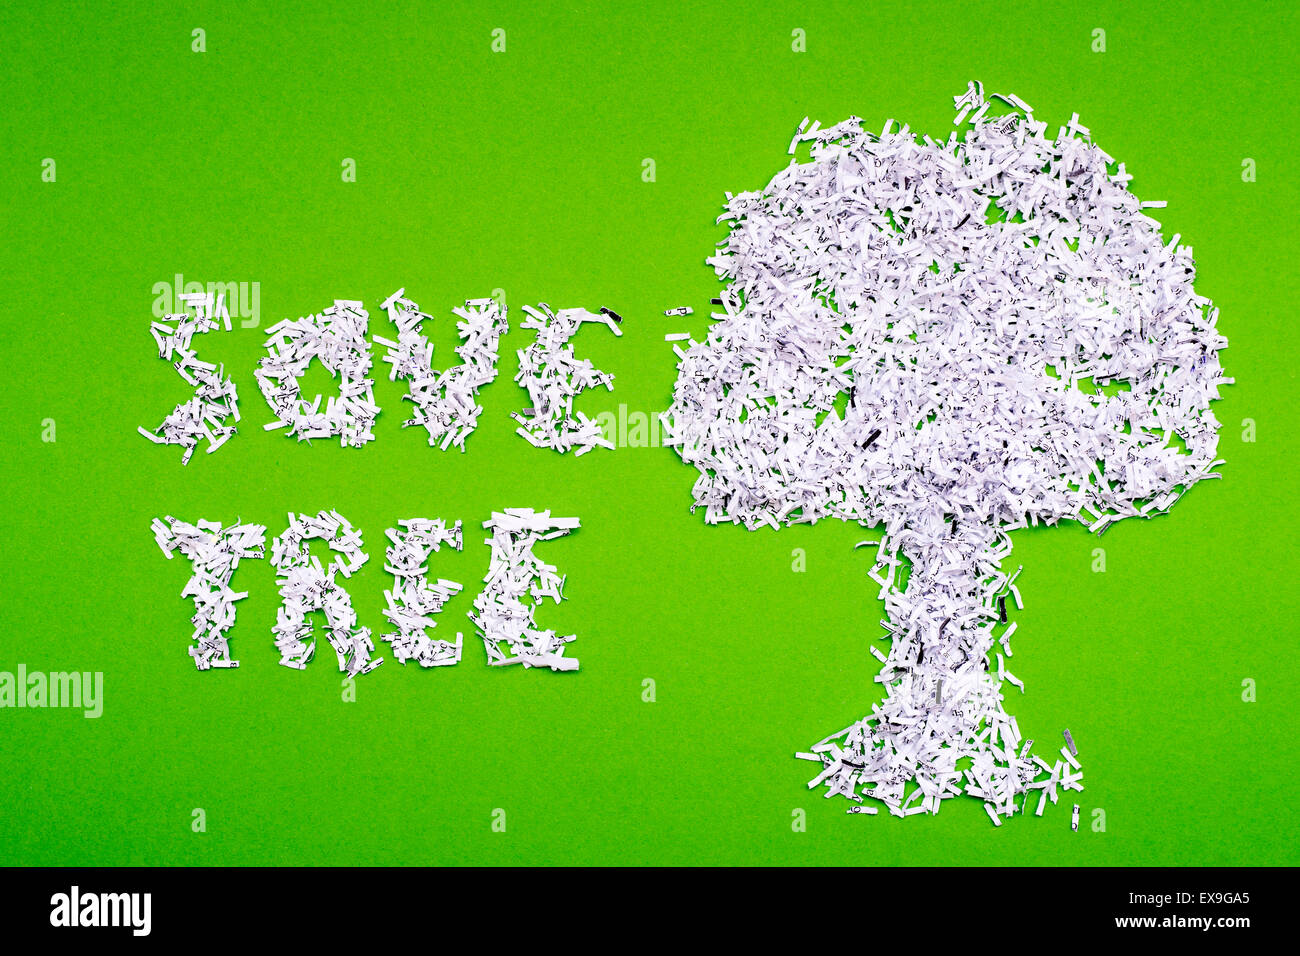 save tree concept made from shredded paper on green background ...